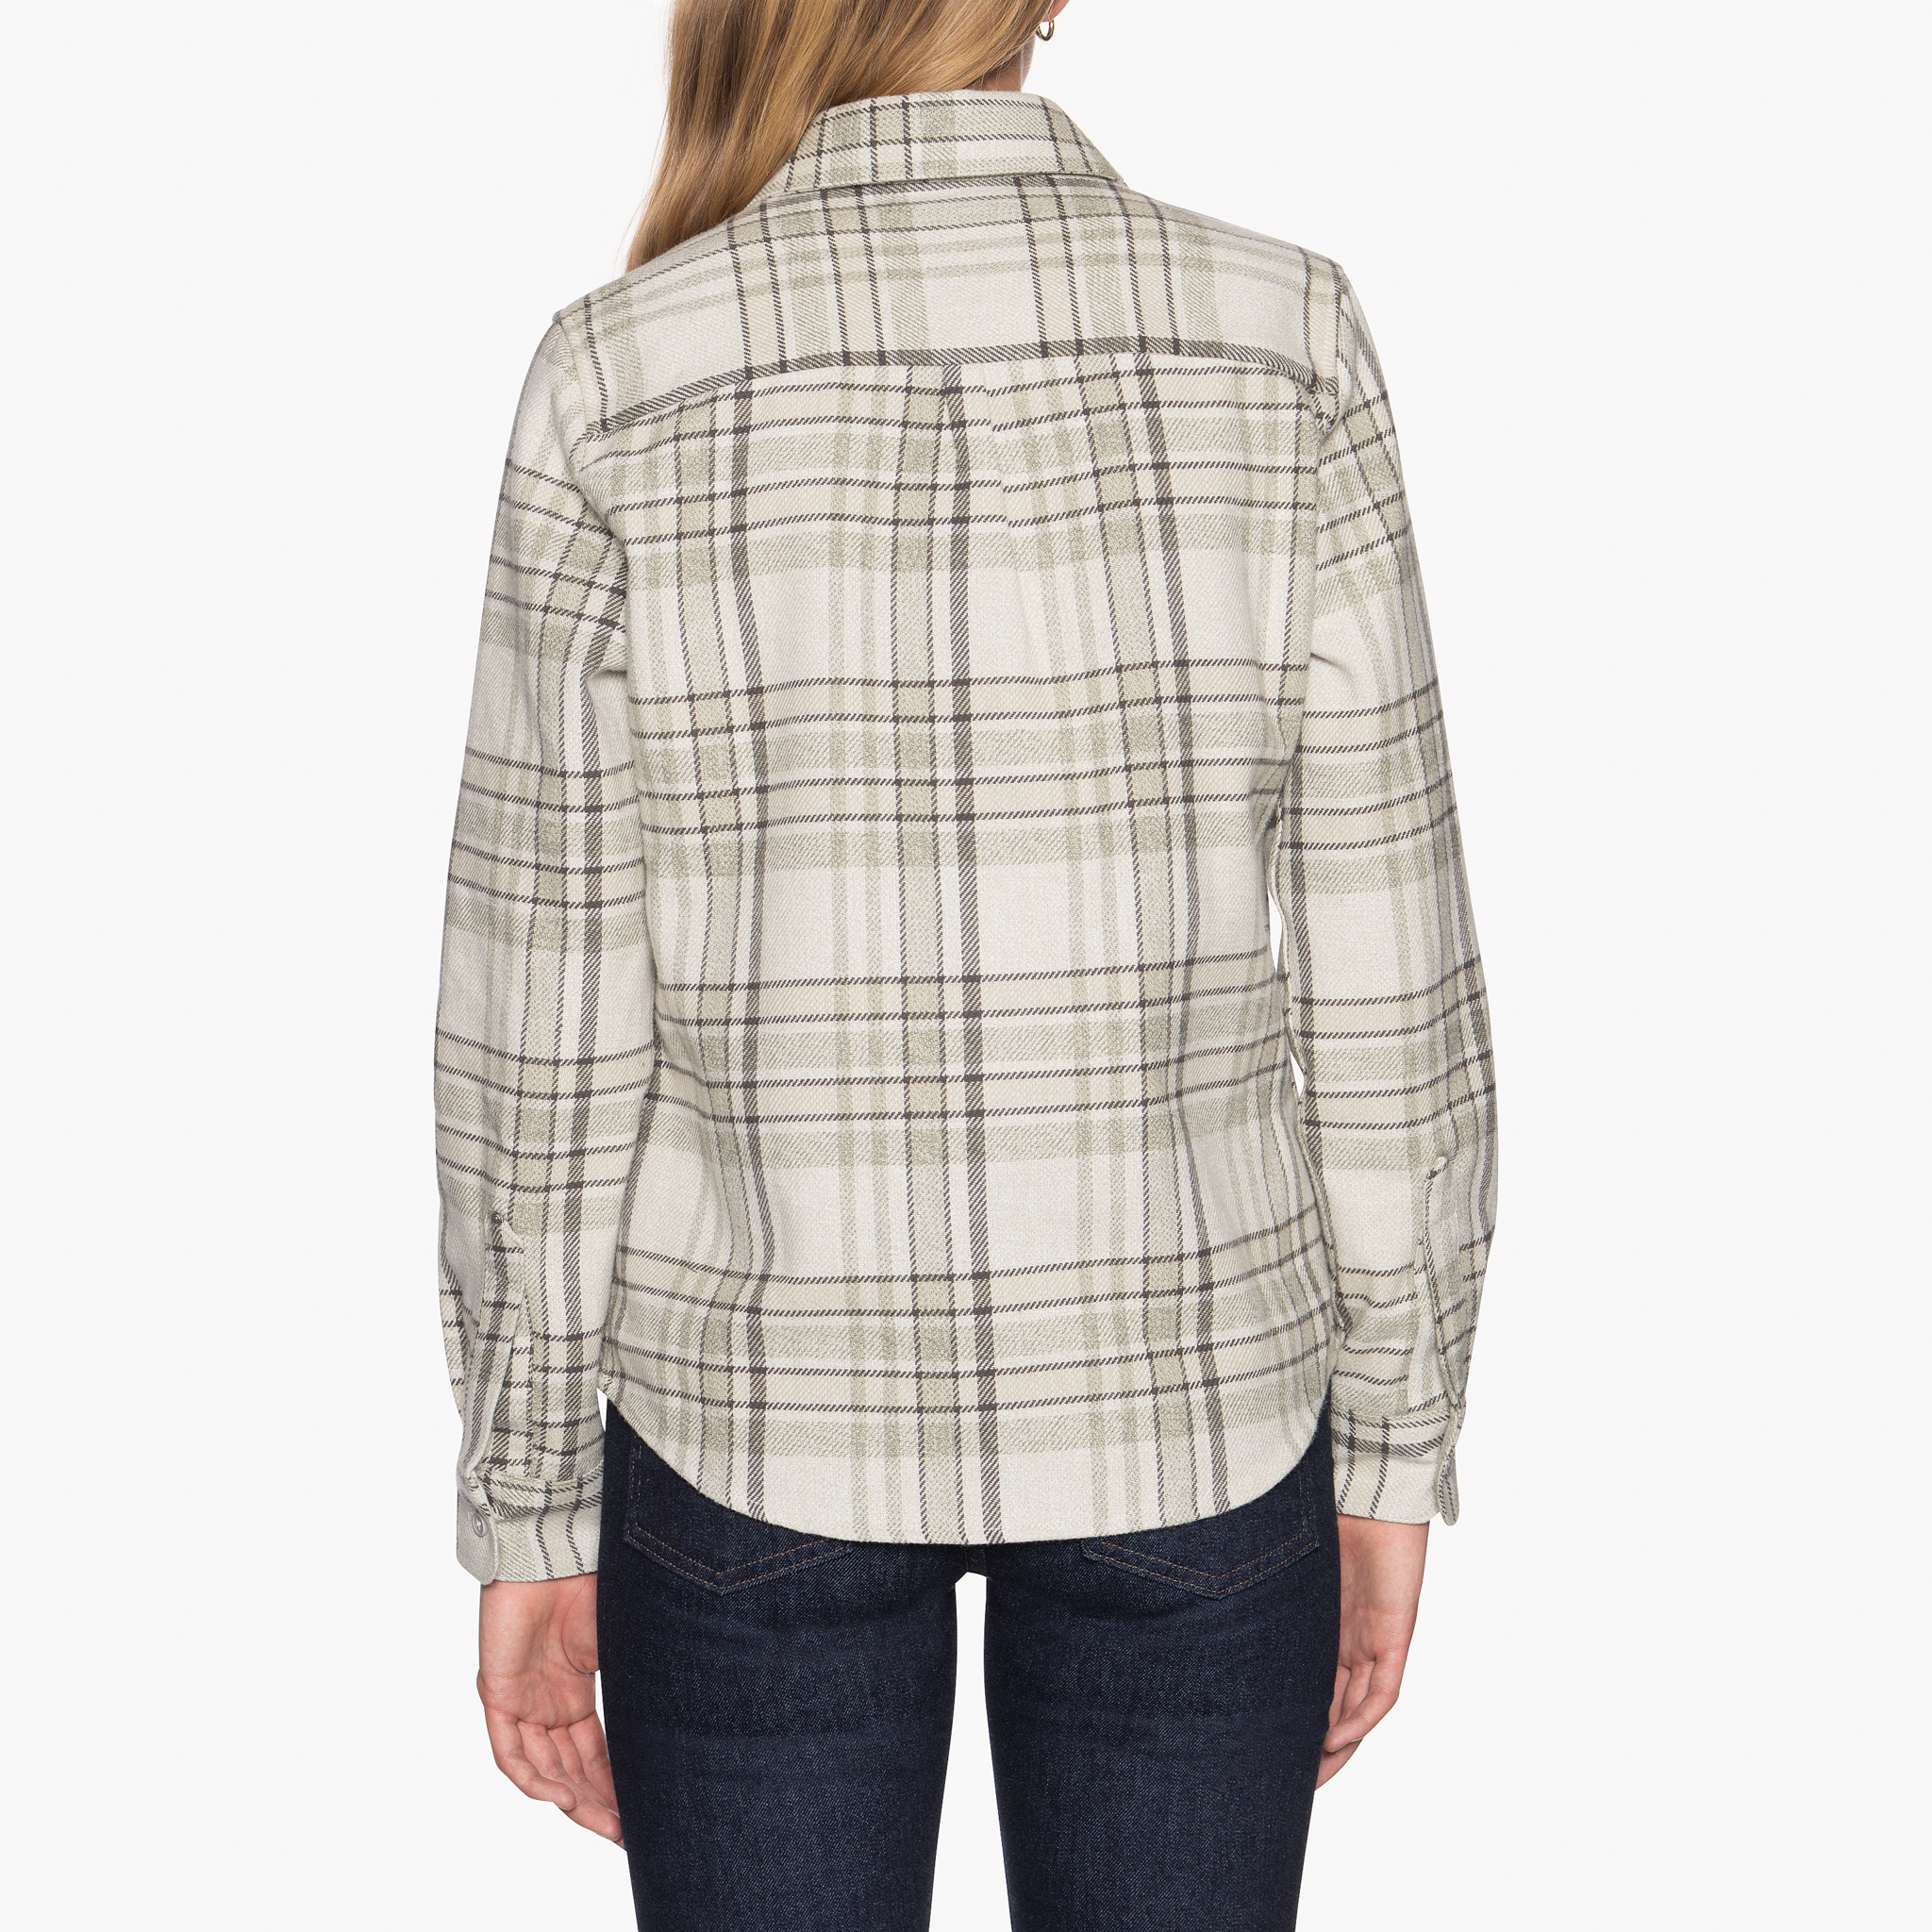  Women’s Country Shirt - Heavy Vintage Flannel - Pale Grey - back 